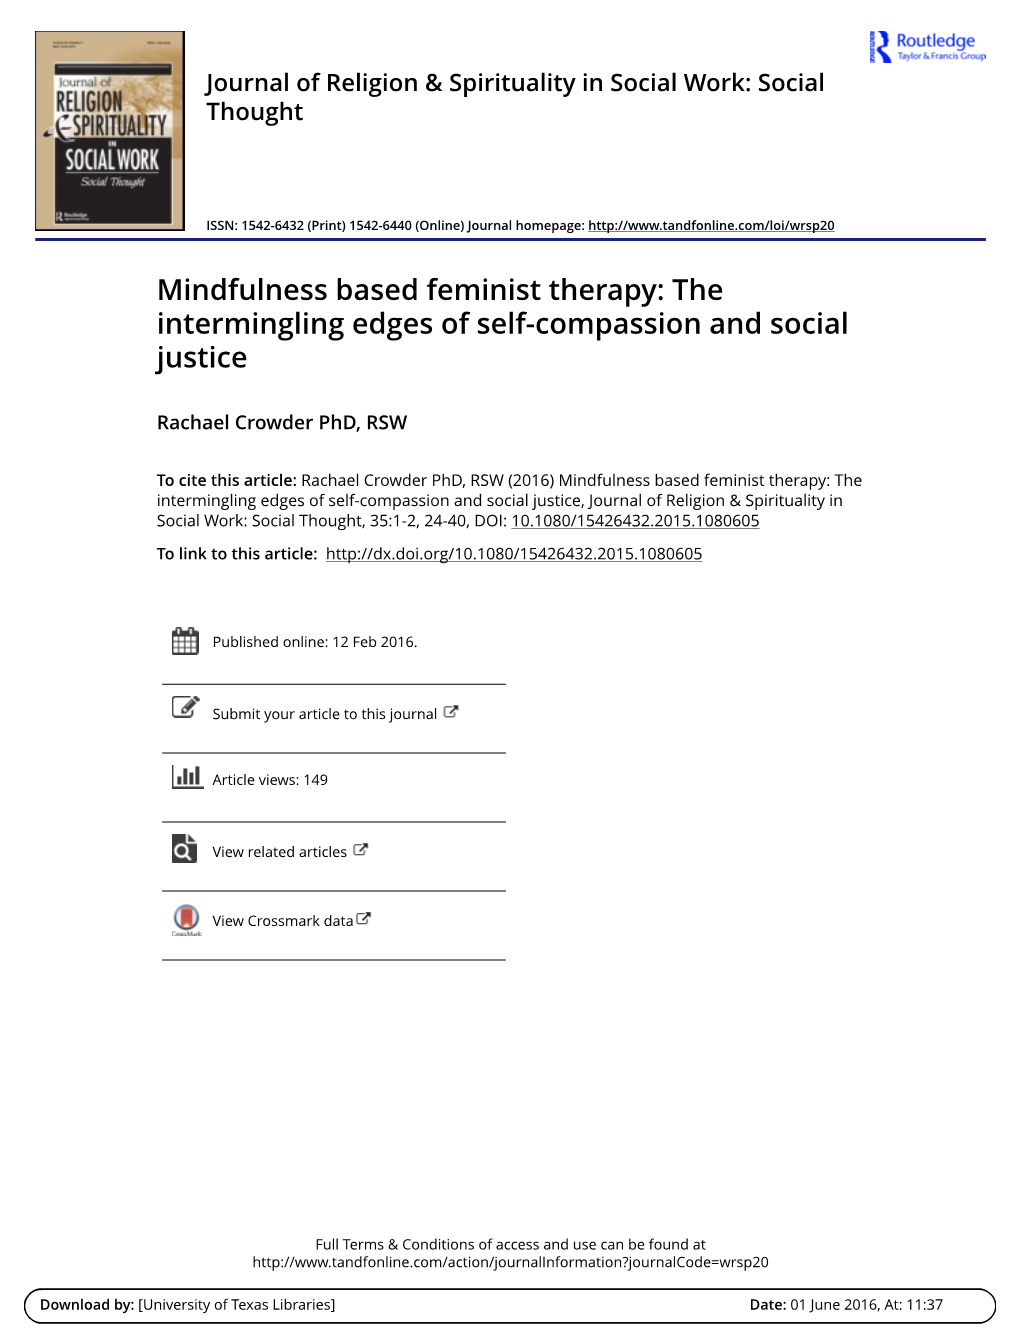 Mindfulness Based Feminist Therapy: the Intermingling Edges of Self-Compassion and Social Justice